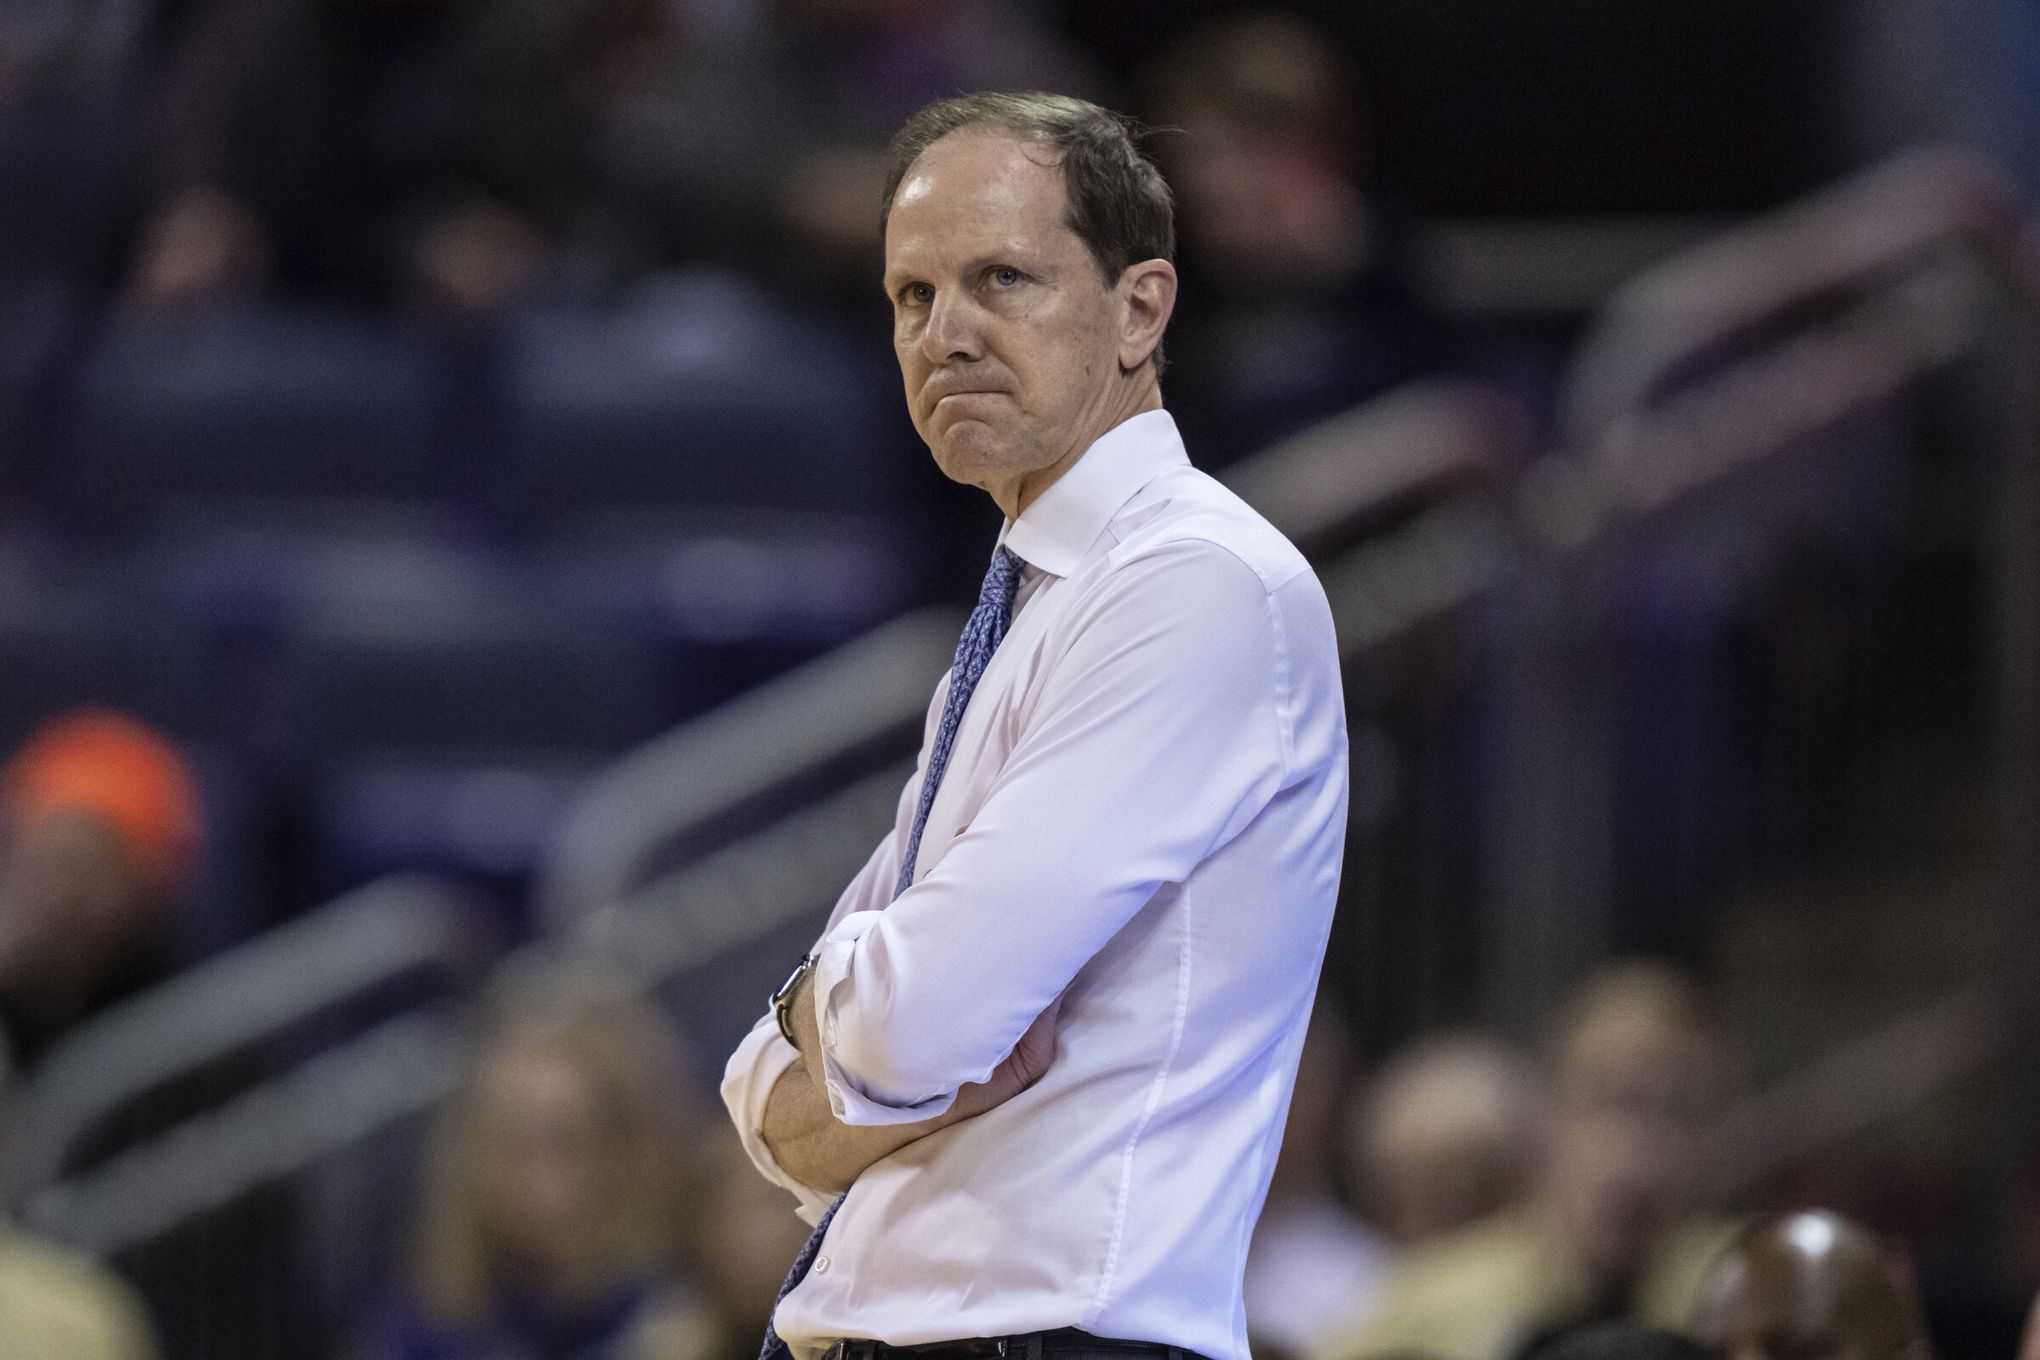 Mike Hopkins reflects on time with now-retired coach Jim Boeheim